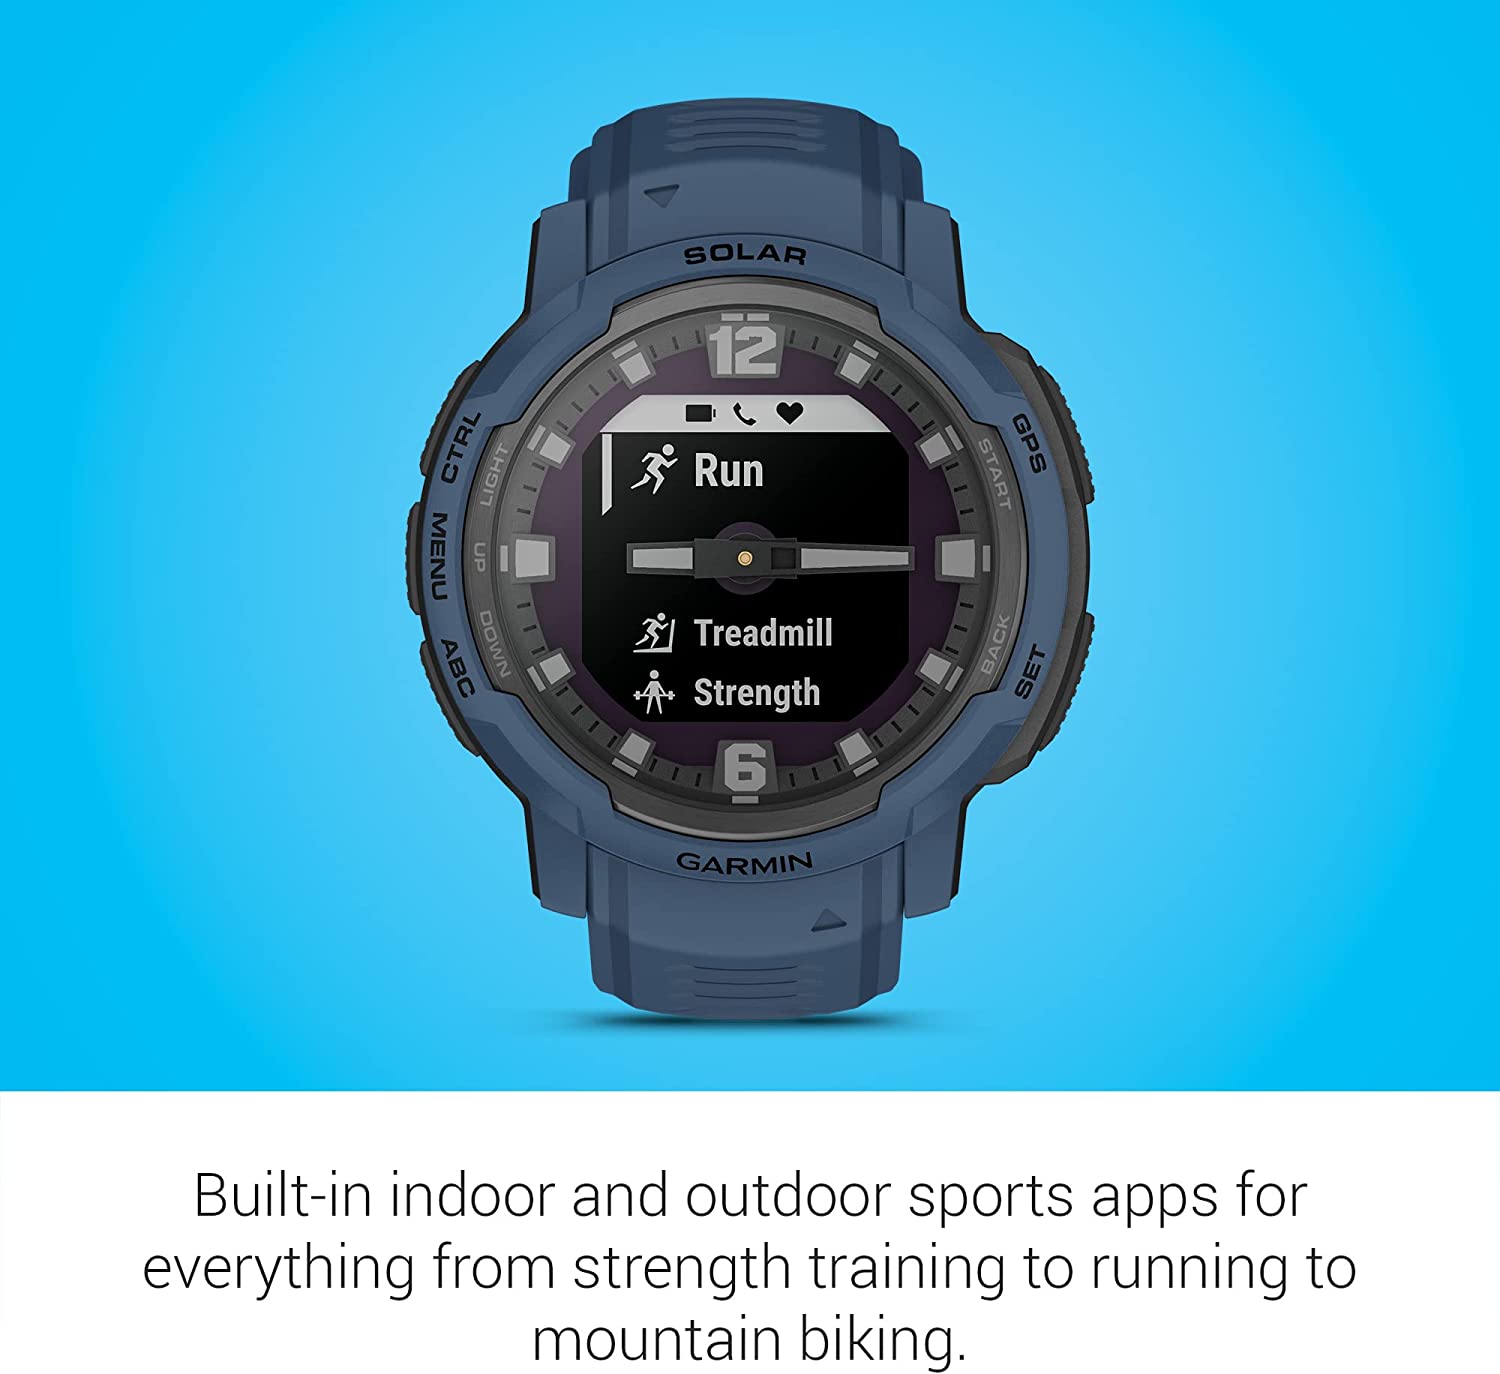 Garmin’s Instinct Crossover Watch: Packed with Fitness and Health Features, Navigation Systems, and Notable Metrics, but Minor Inconveniences Arise